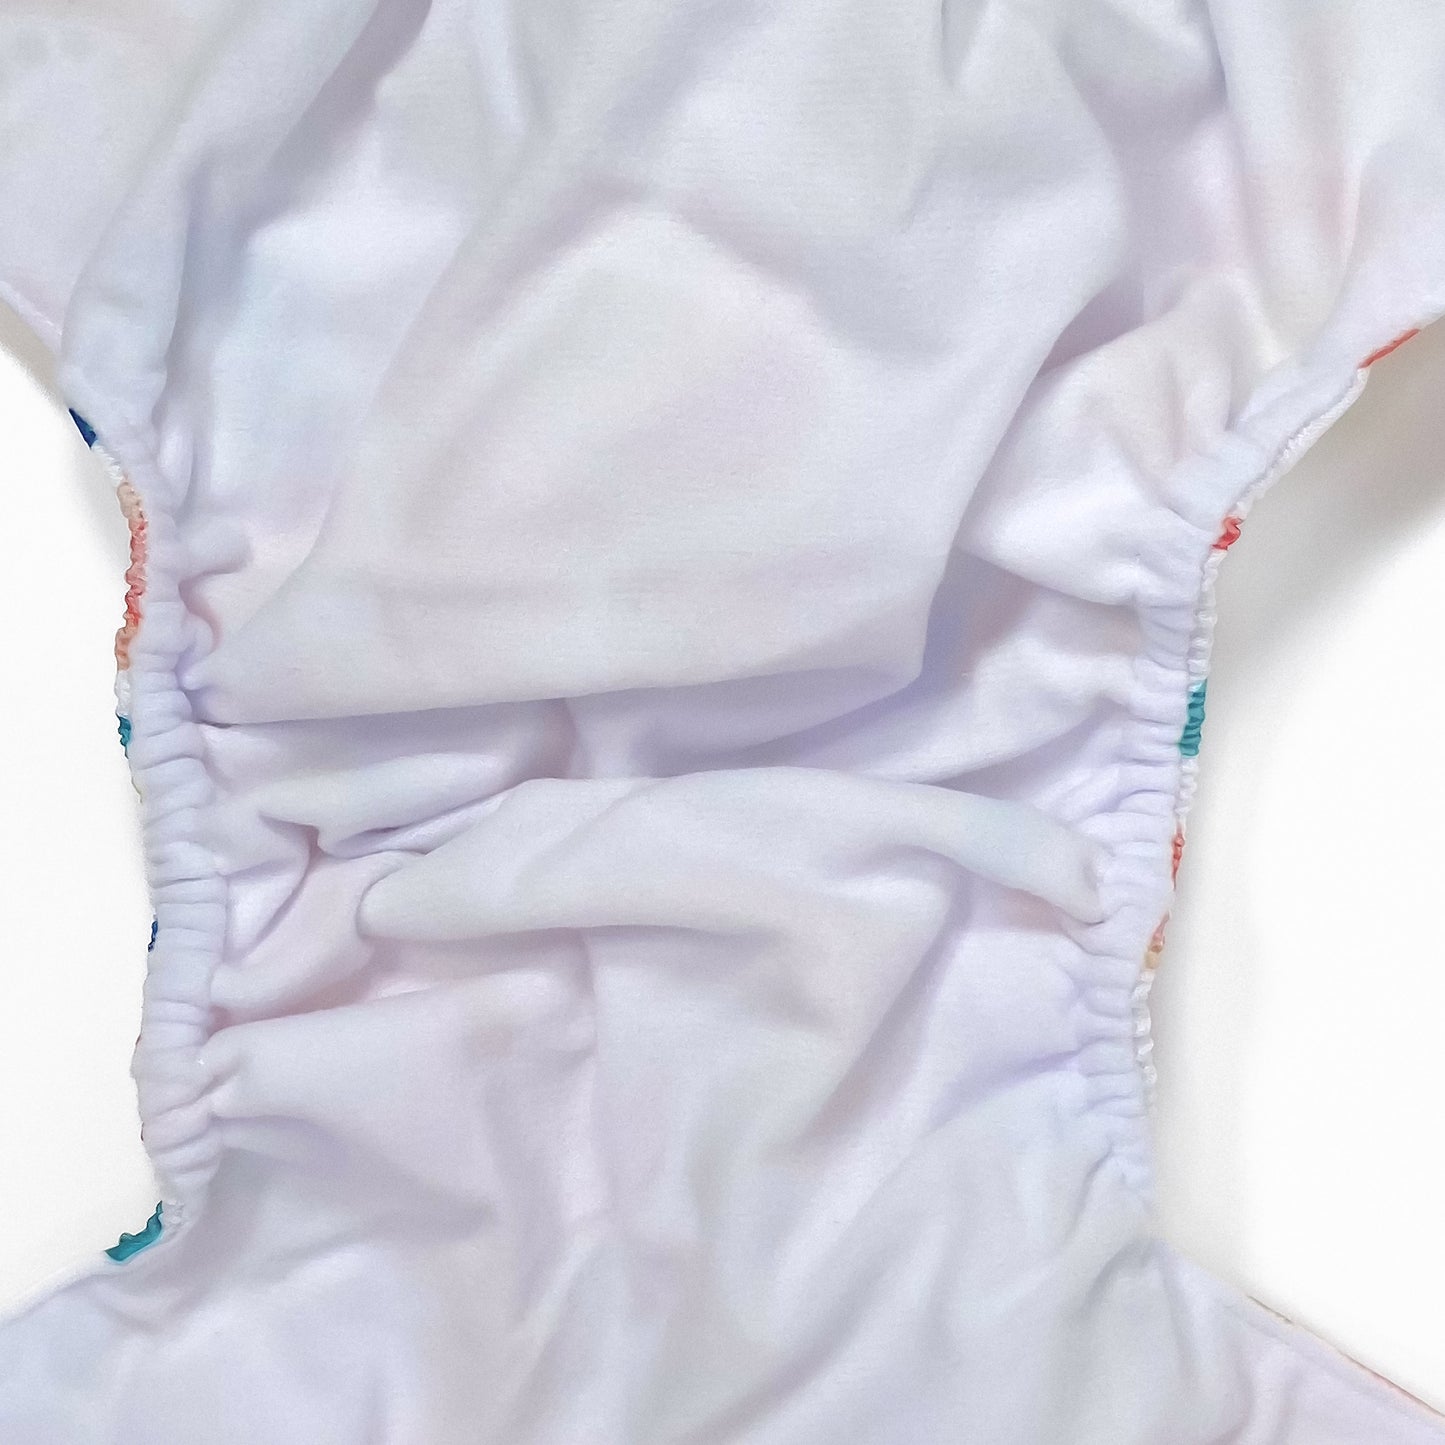 An adjustable reusable nappy for babies and toddlers, featuring a bright rainbow design, with brightly coloured rainbows on a white background. Image shows a zoomed in view of the nappy fabric lining.